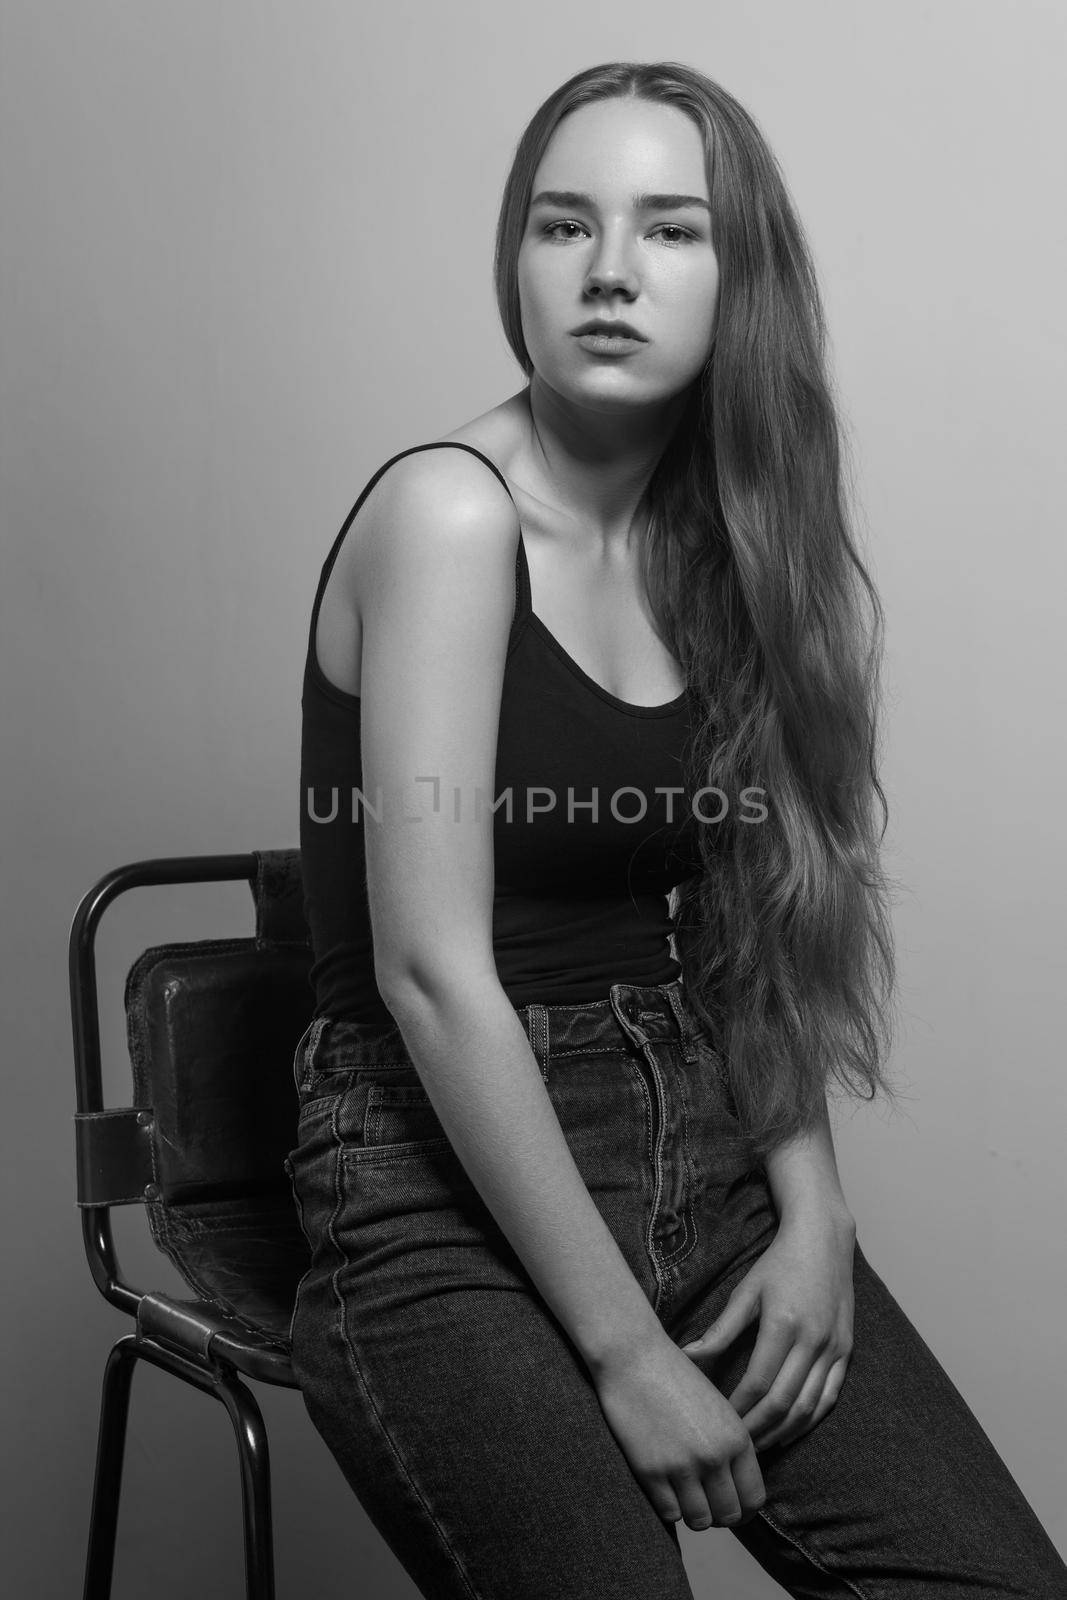 Gesture woman sit on chair and looking at camera. Studio shot, isolated on gray background